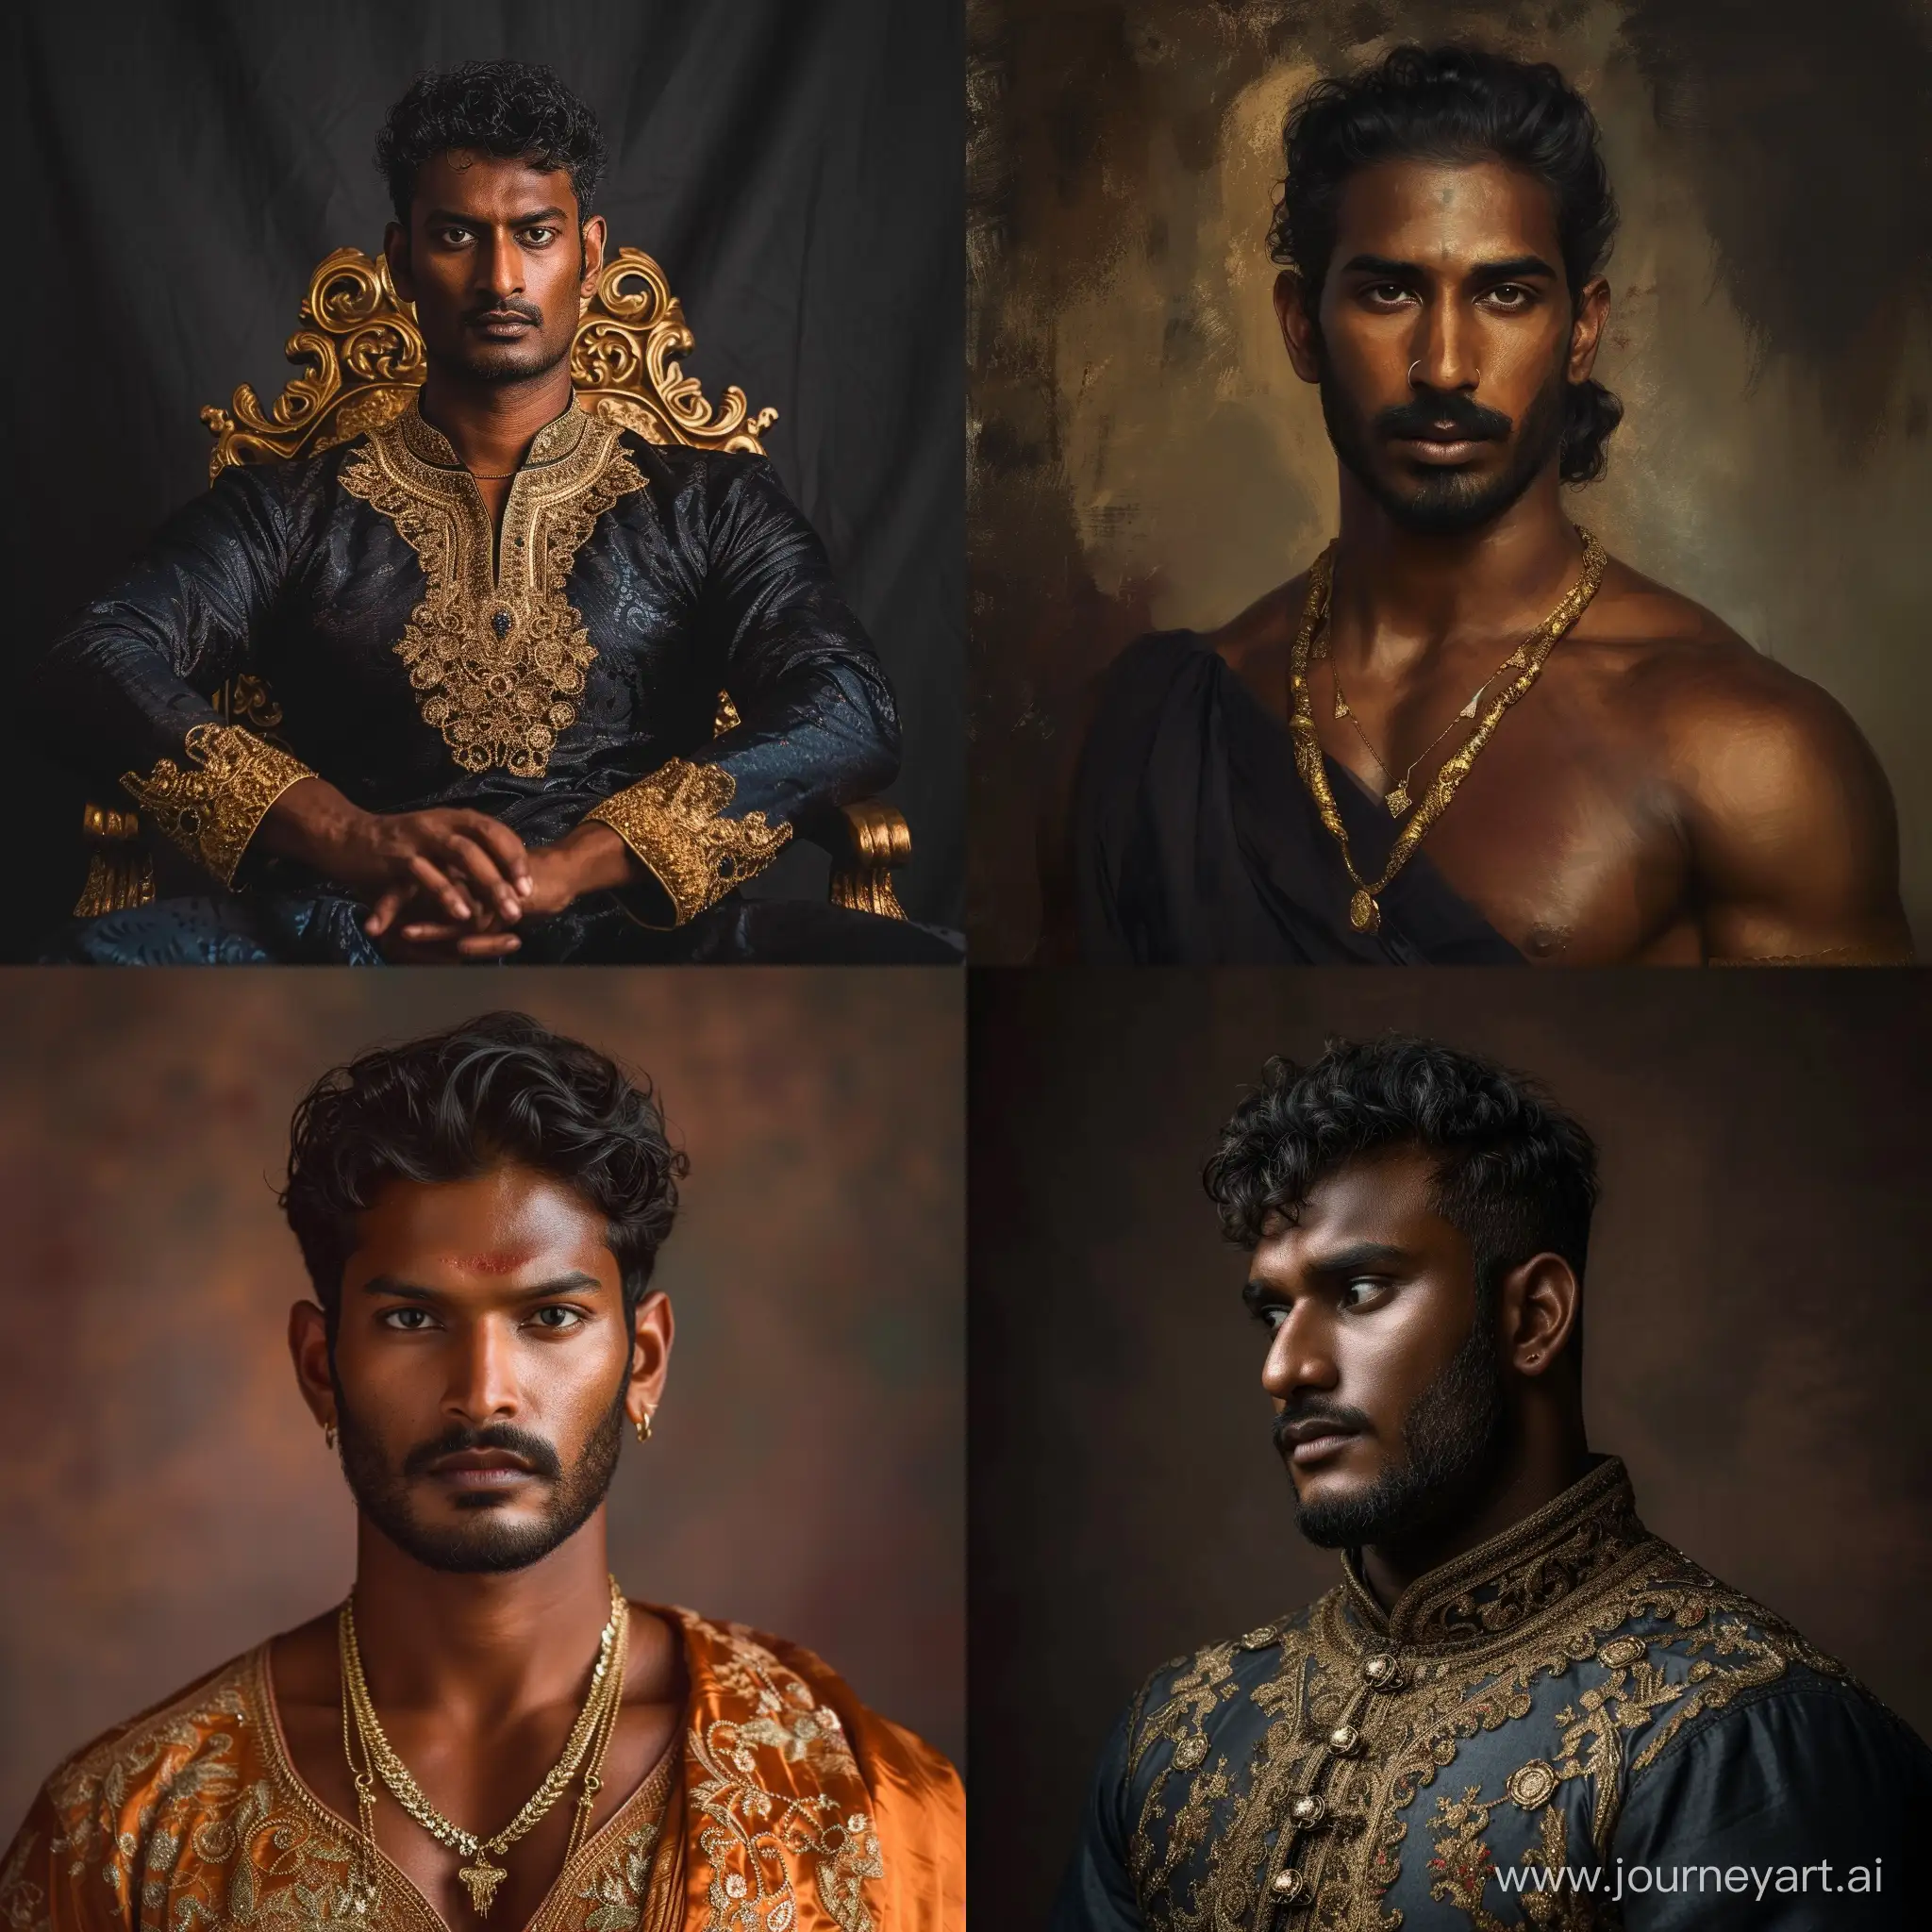 High quality and realistic portrait of a single man of age 25, athletic body Prince on medieval era of tamil kingdom